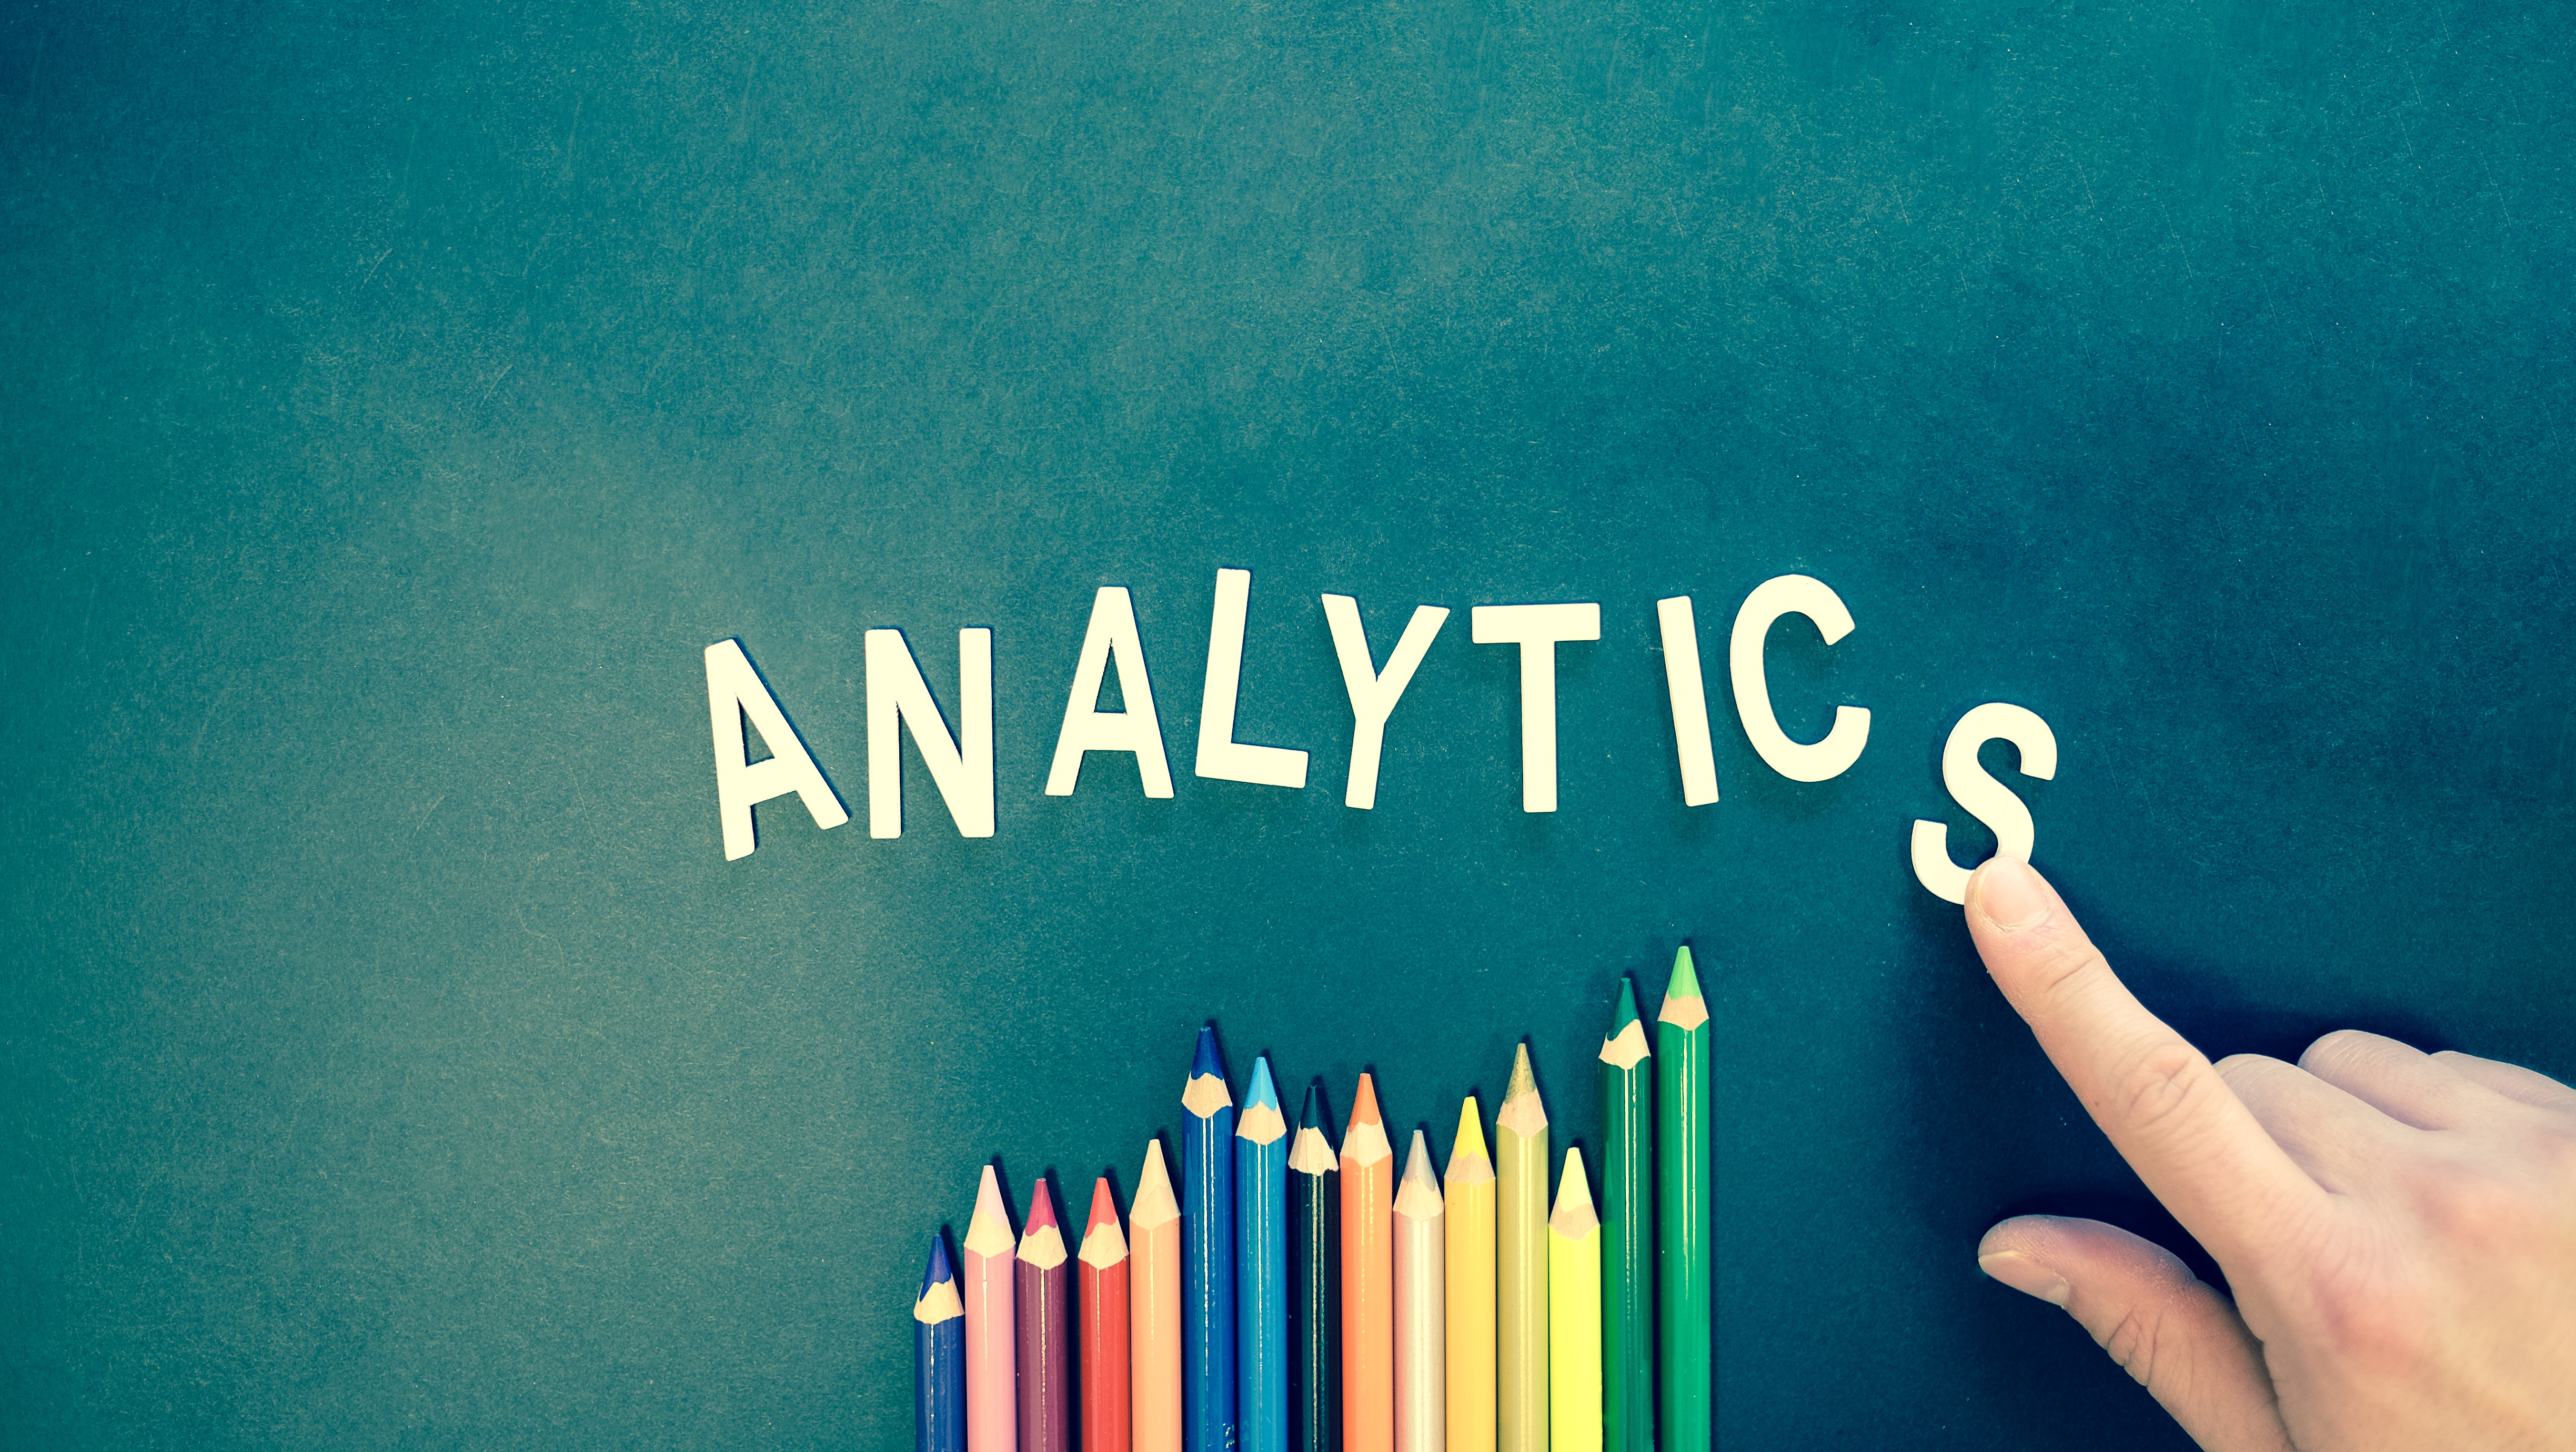 Google analytics is a fantastic way to measure the success of your blogging